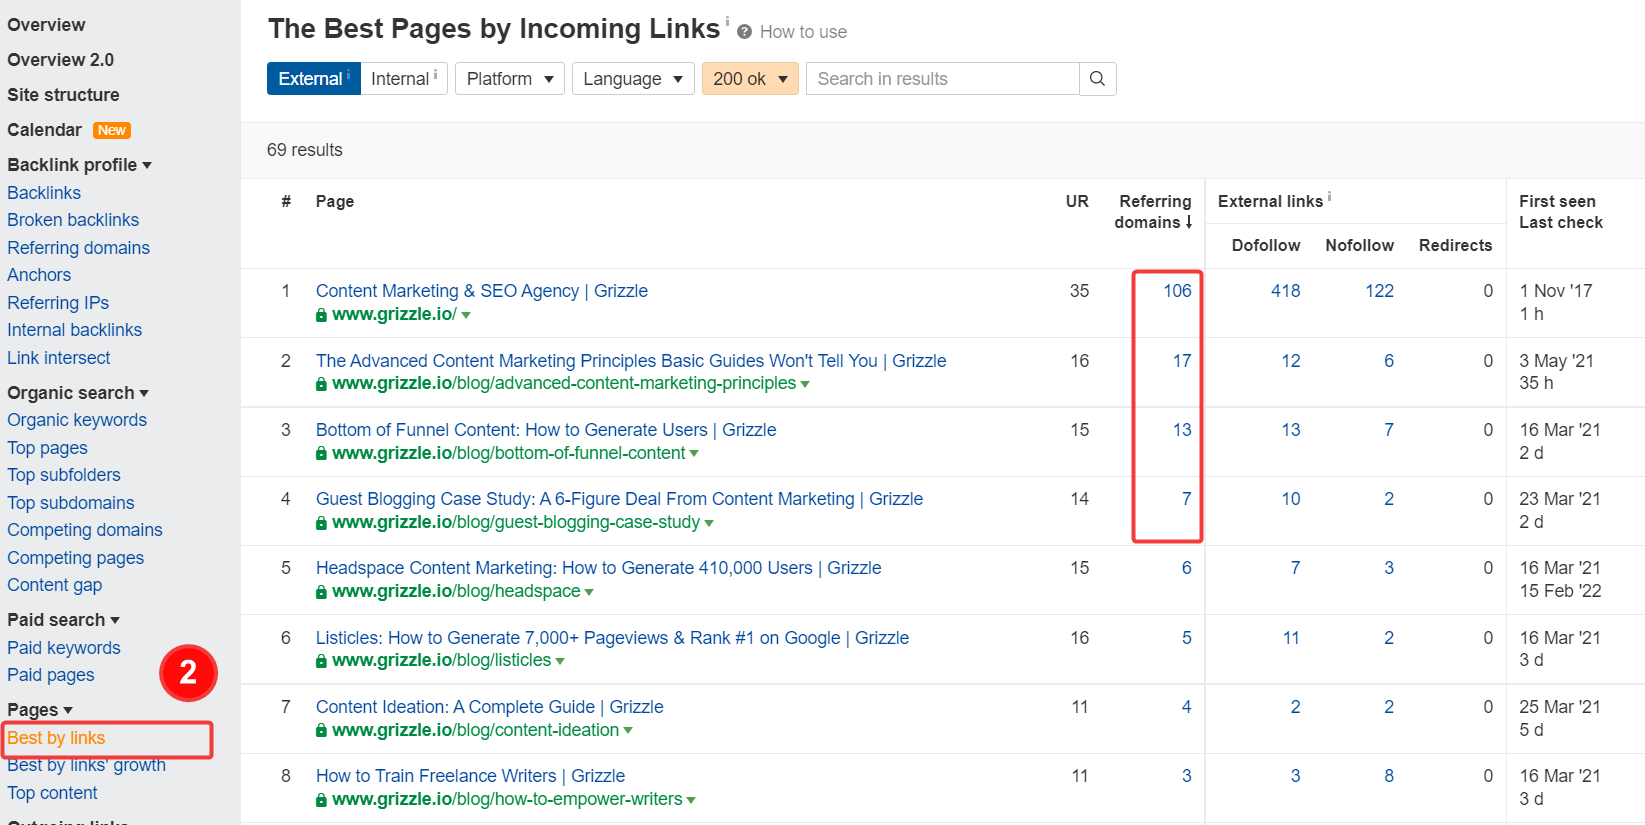 The best pages by incoming links, Ahrefs